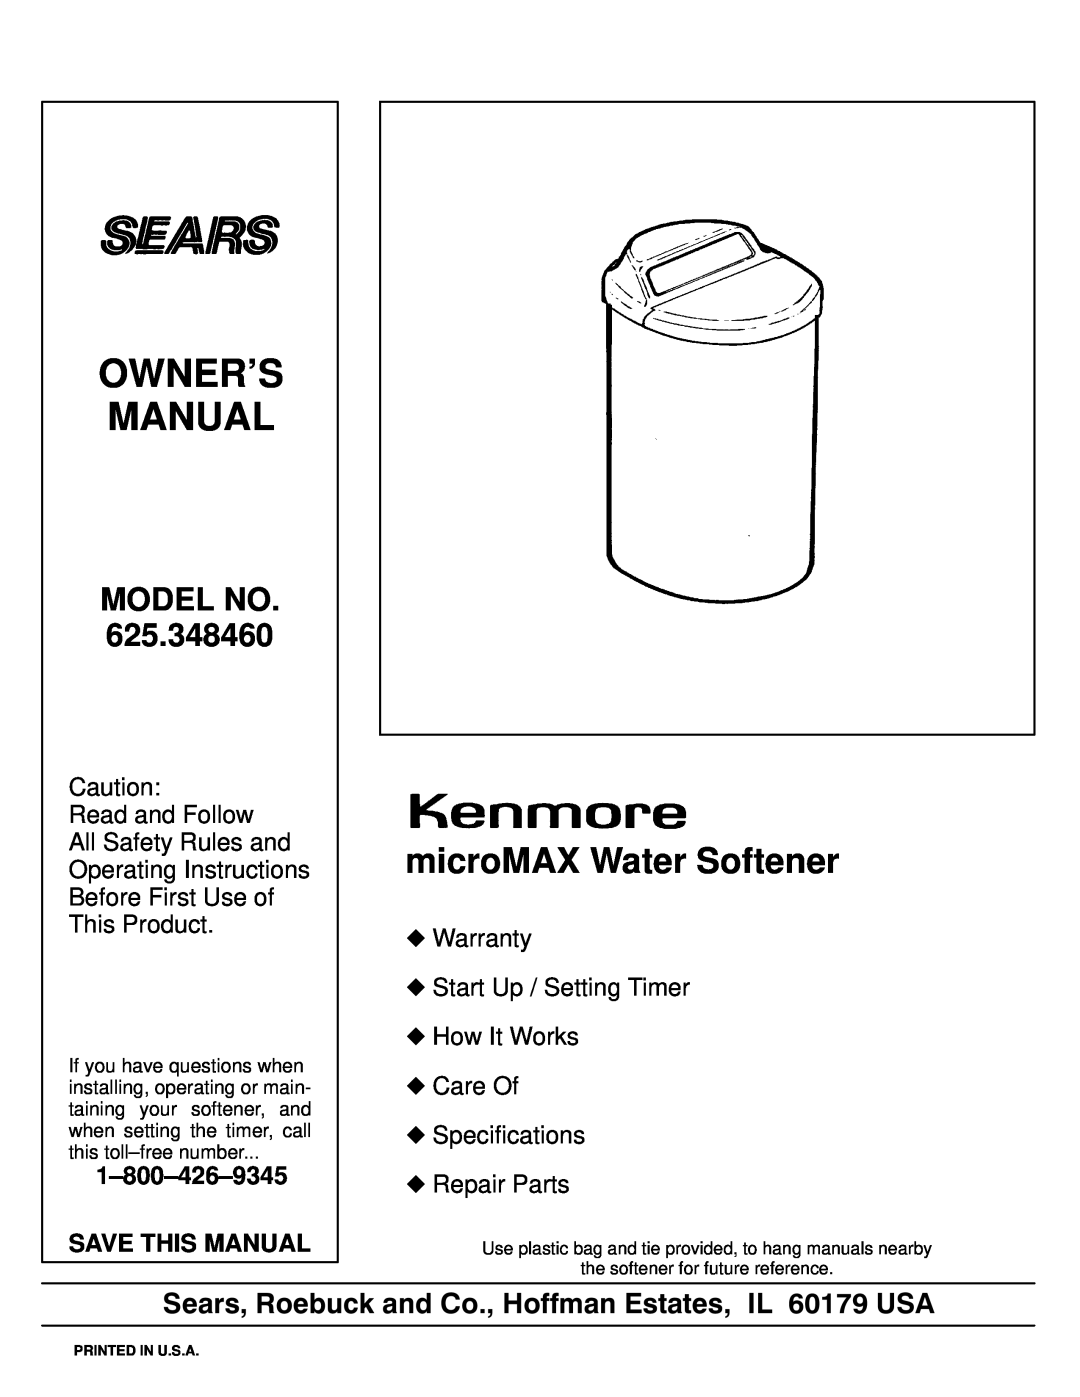 Kenmore 625.348460 owner manual microMAX Water Softener, Model No, Owners Manual, Before First Use of This Product, C I A 